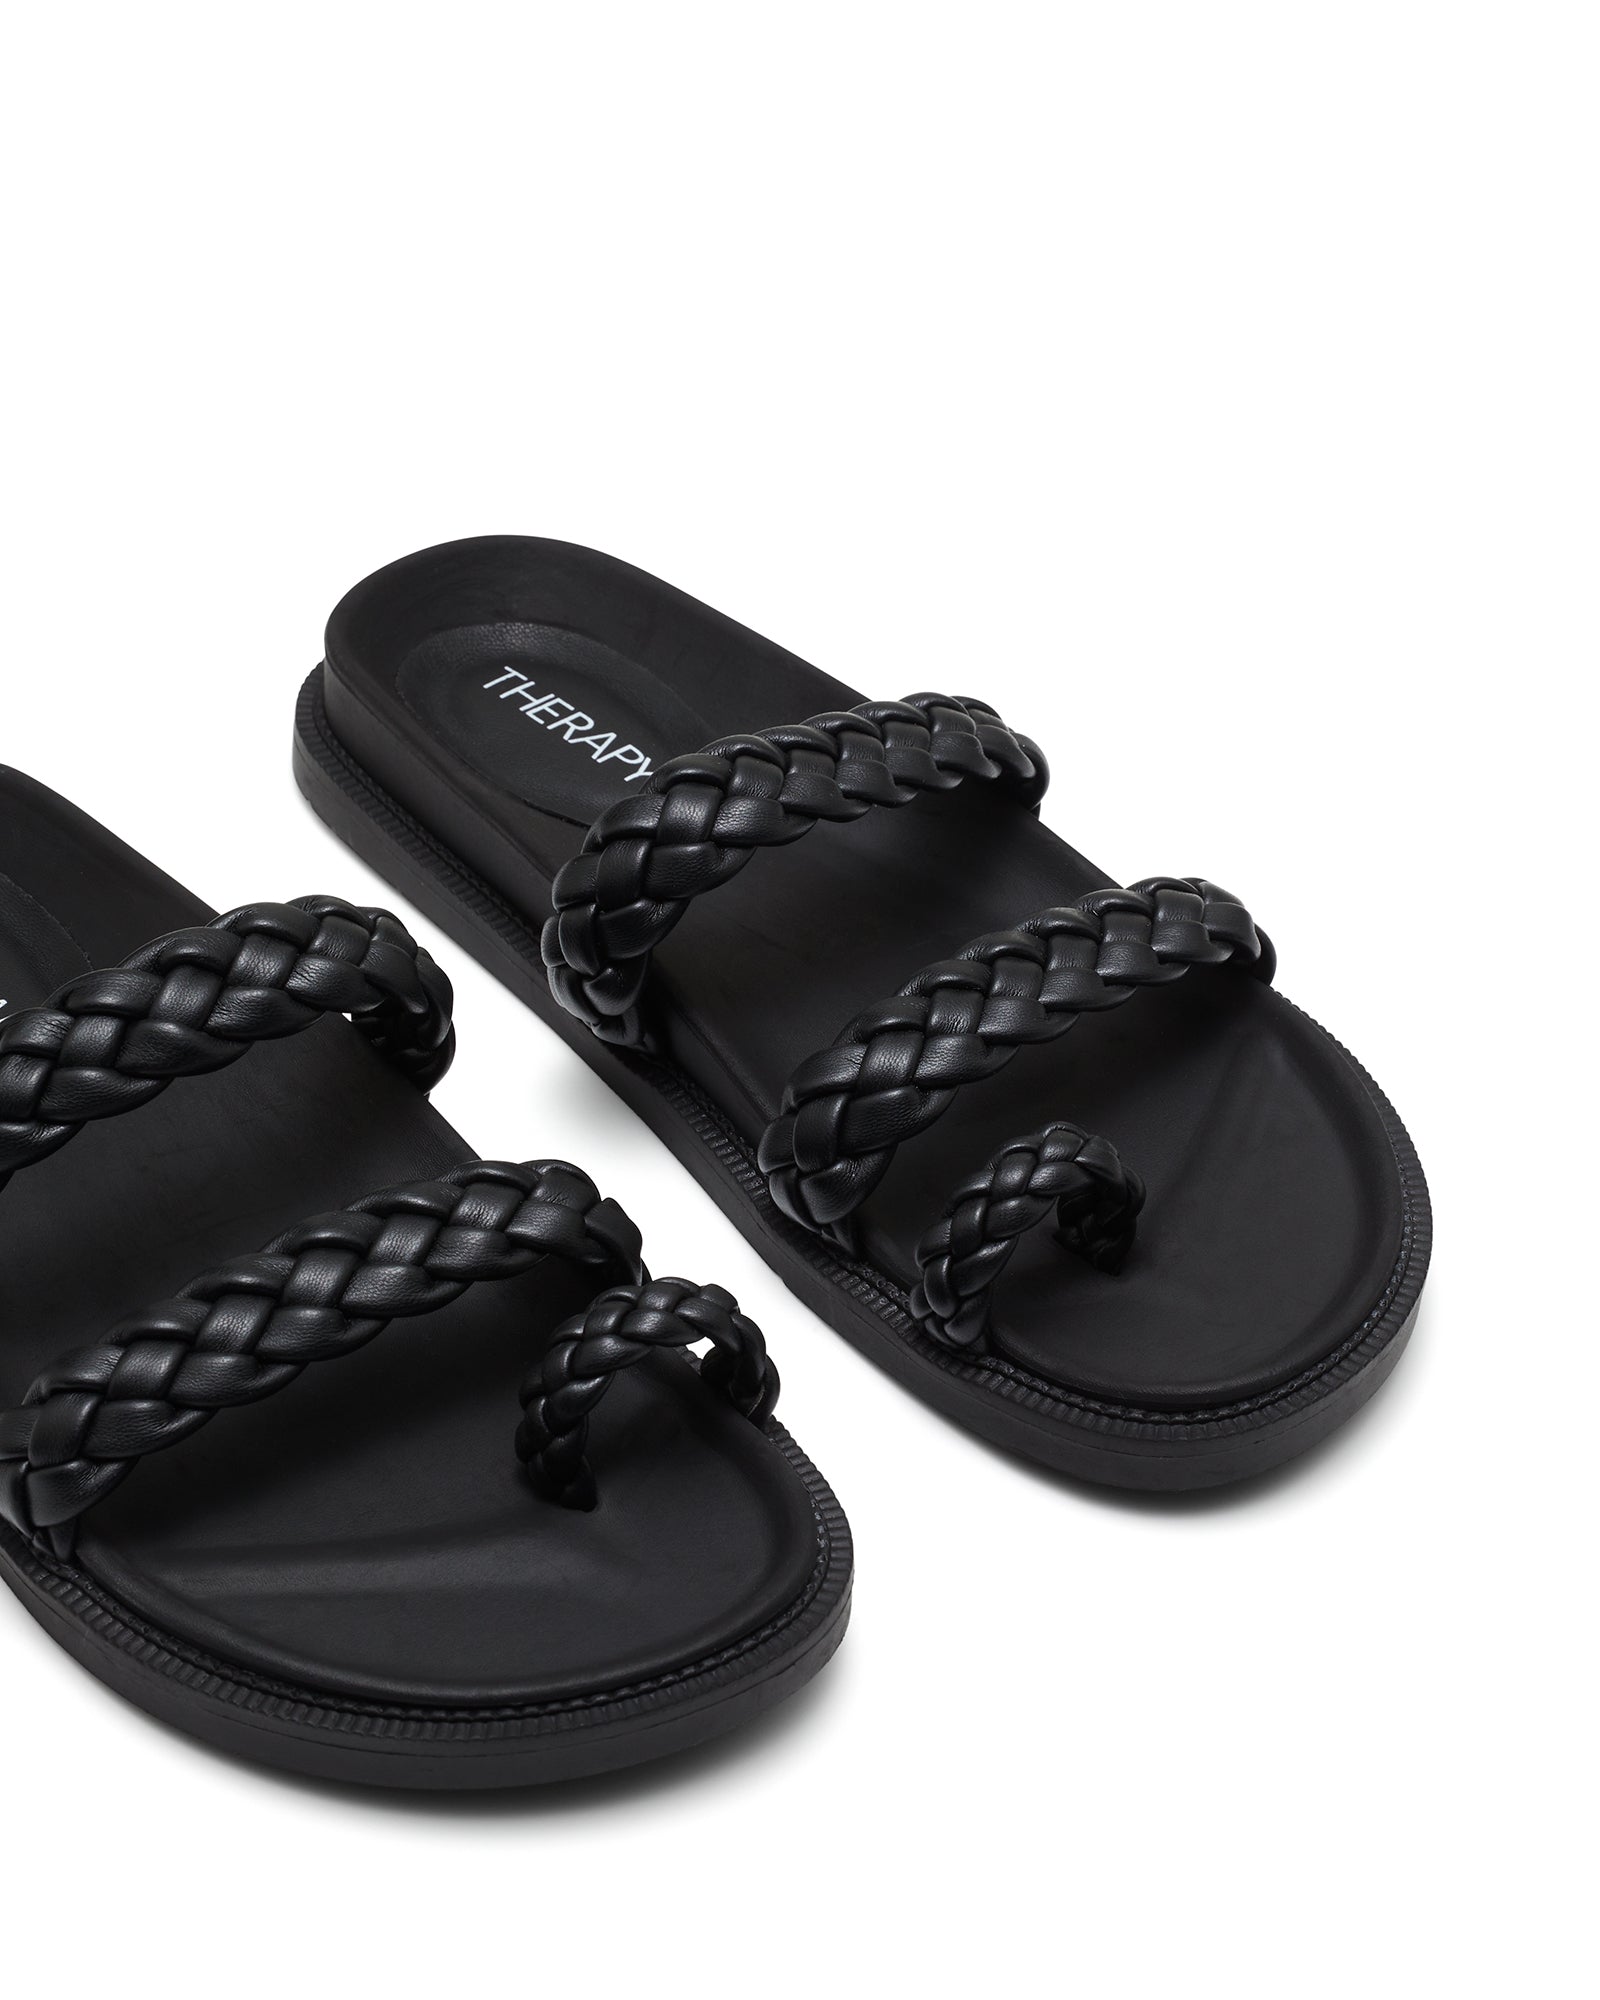 Therapy Shoes Equal Black | Women's Sandals | Slides | Flatform | Woven